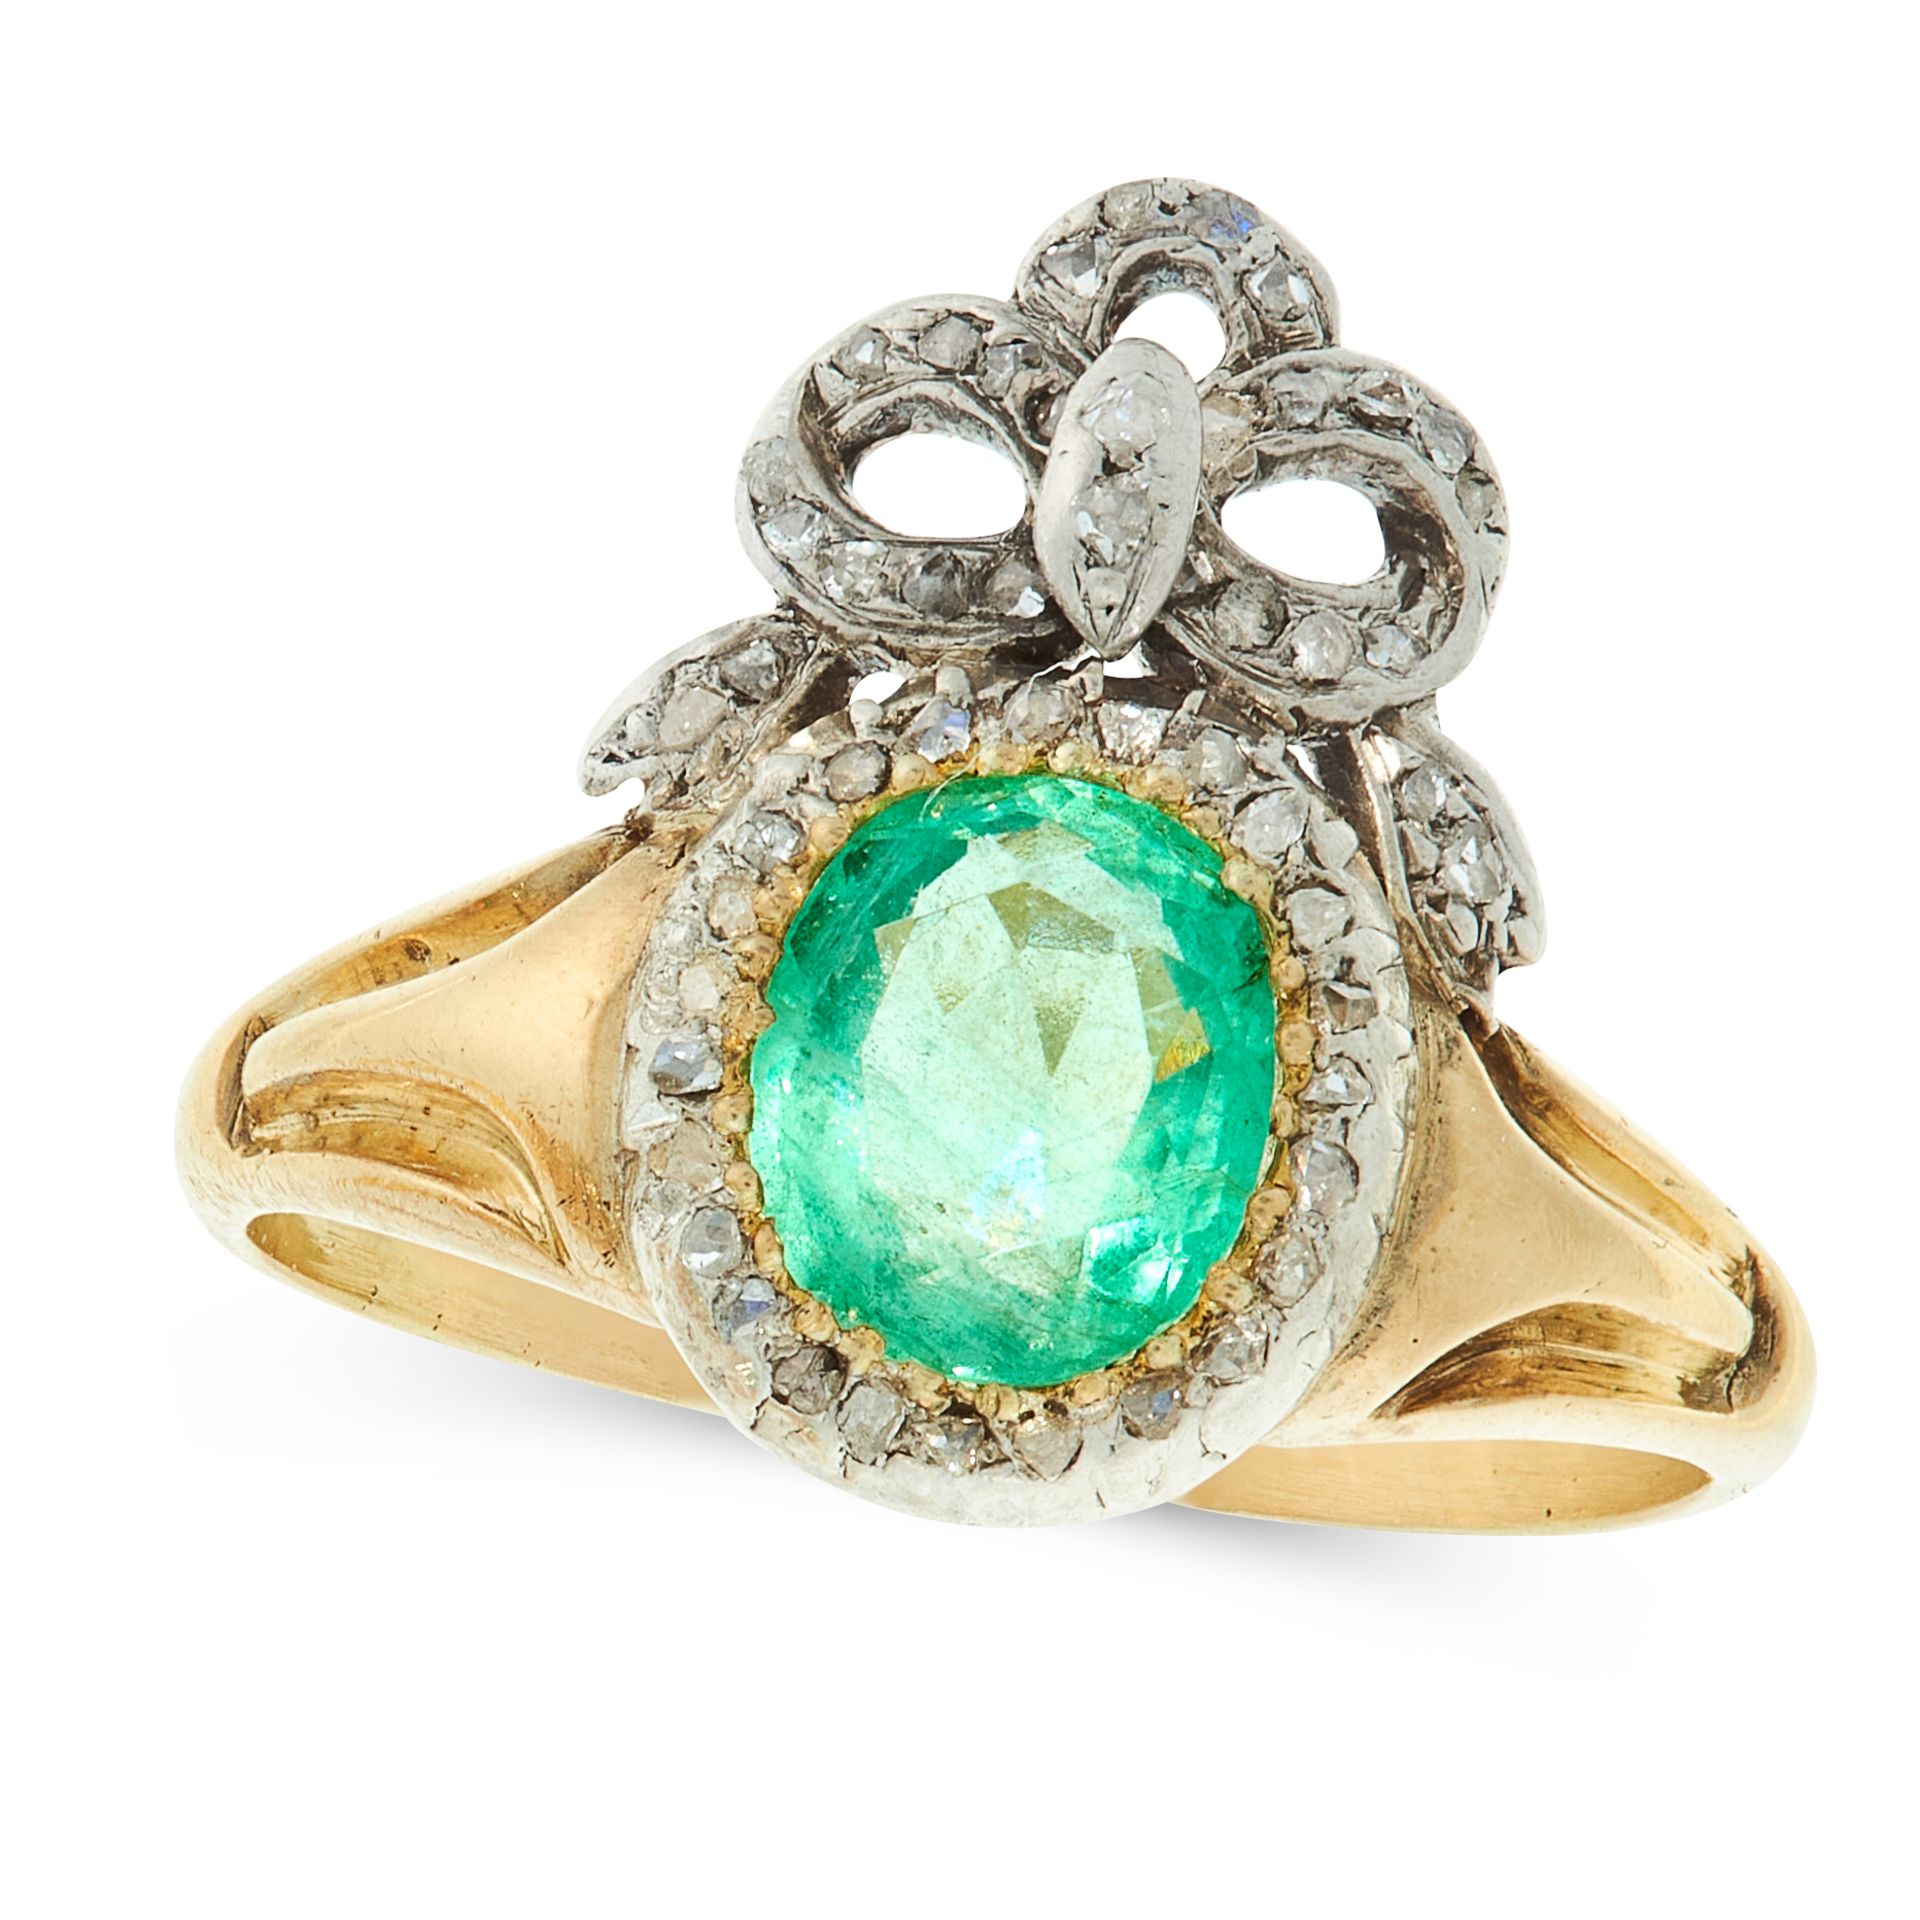 AN EMERALD AND DIAMOND SWEETHEART RING in yellow gol and silver, set with an oval cut emerald of 0.